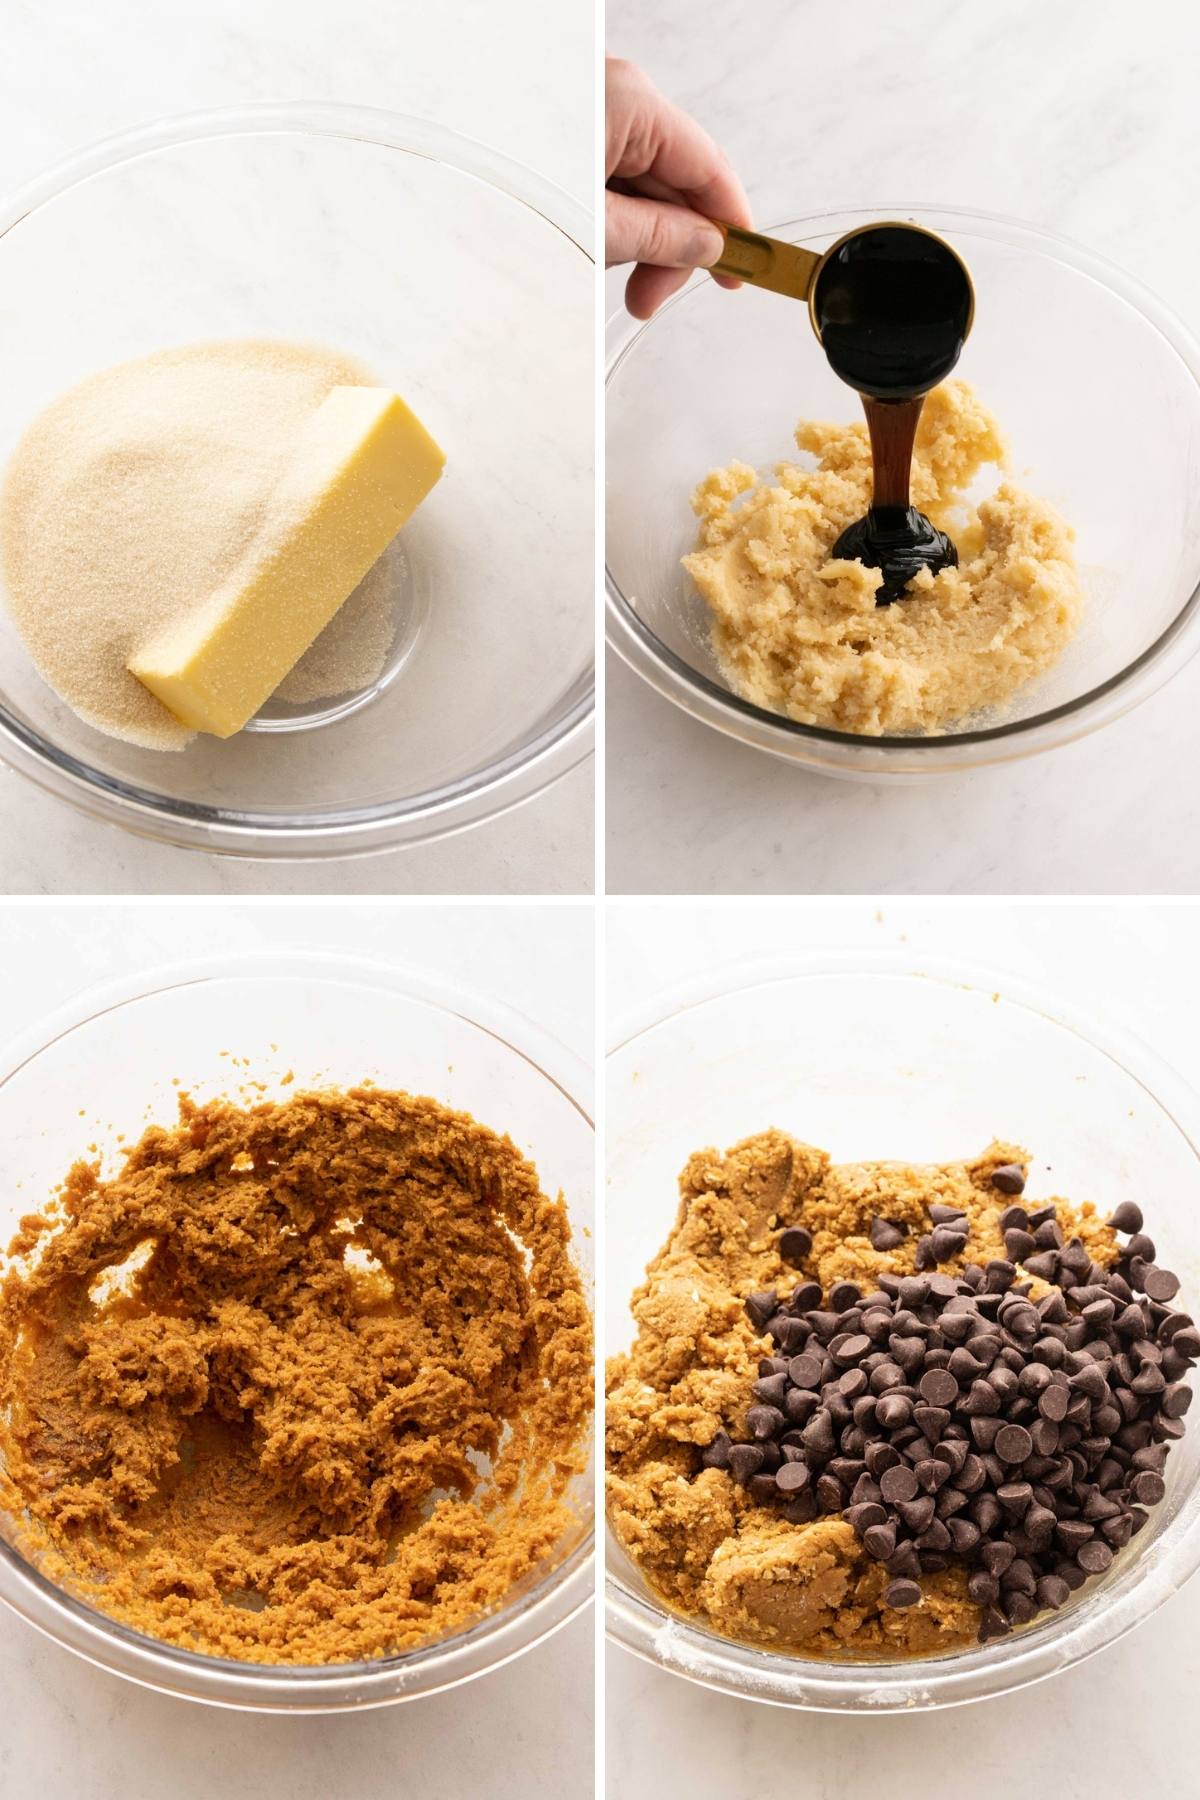 Photo grid of making oatmeal molasses chocolate chip cookies